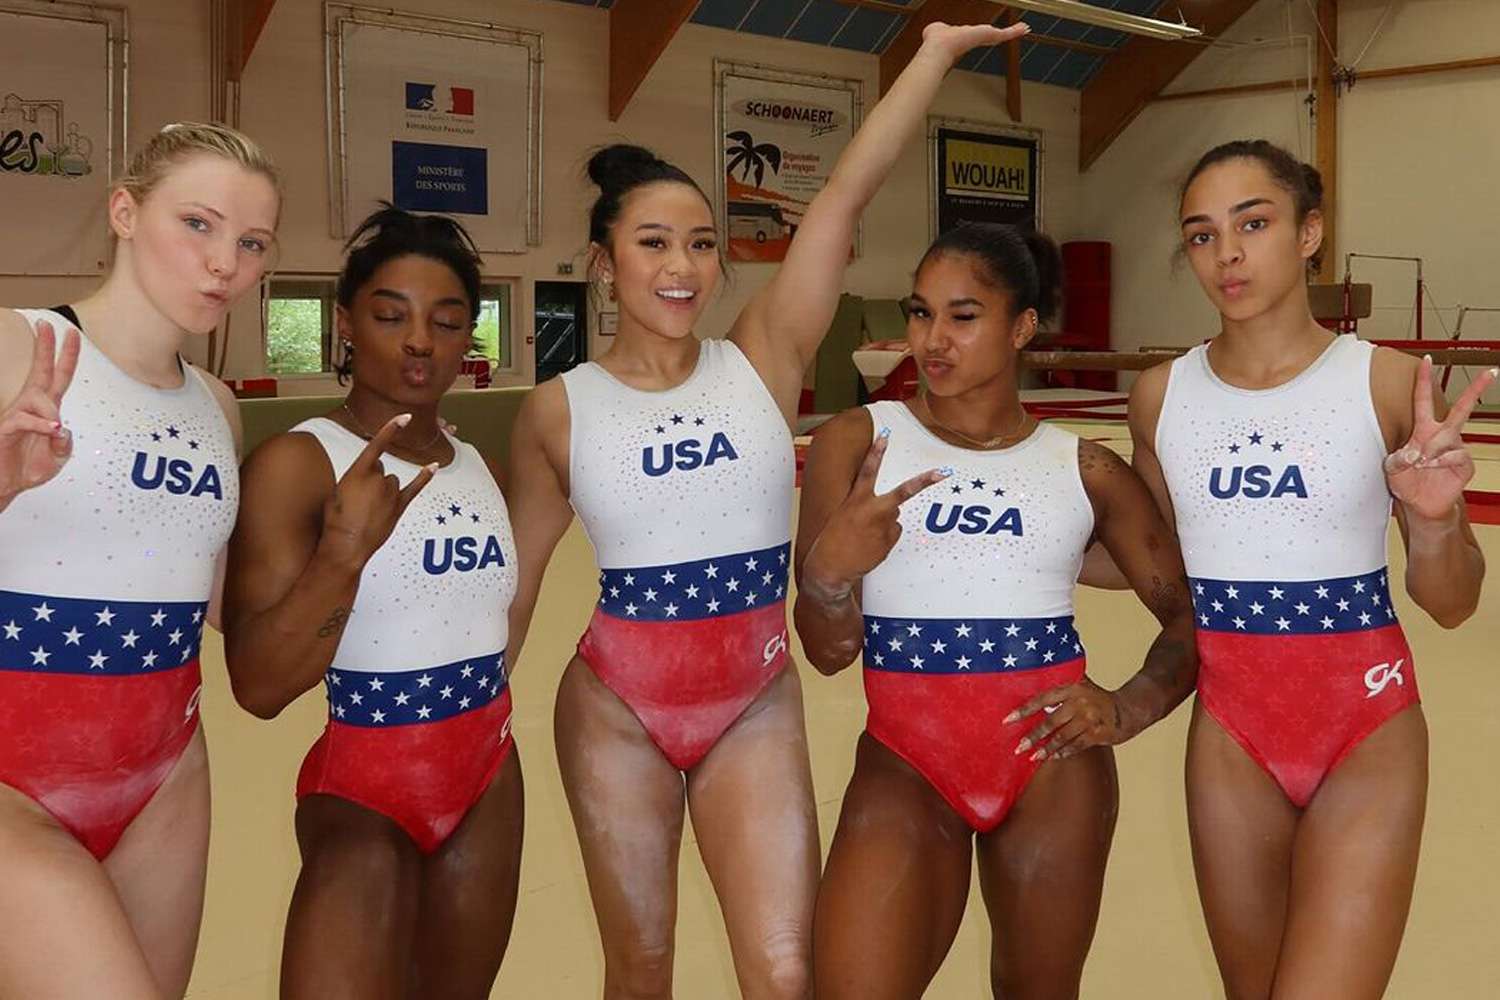 Simone Biles Shares Photos of U.S. Gymnastics Team Posing in Their Uniforms After Landing in Paris for Olympics